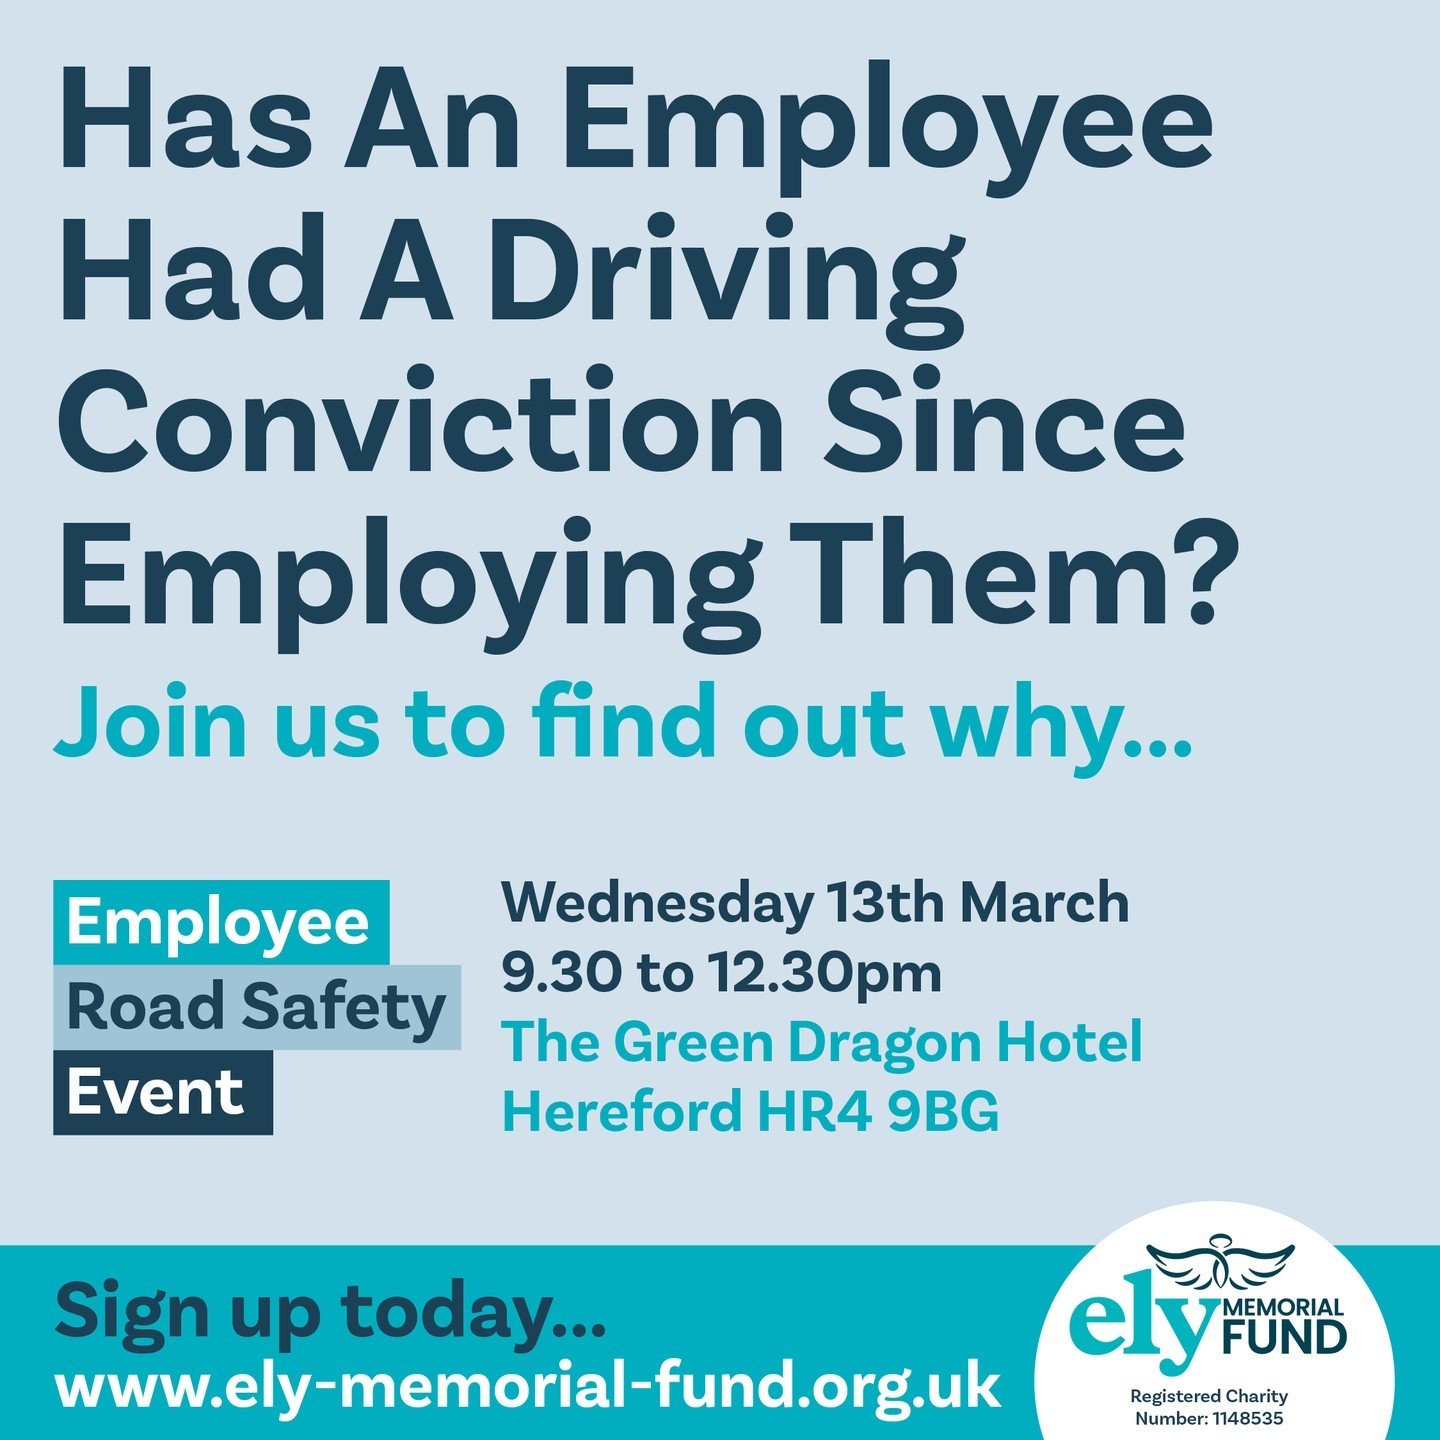 Boost your knowledge with our *FREE to attend* Employee Road Safety Event on 13th March at The Green Dragon Hotel, Hereford.

Book now to secure your space!
https://ow.ly/RHMh50QPo1g

#drivingsafely #Resources #workplace #StaySafeOnTheRoads